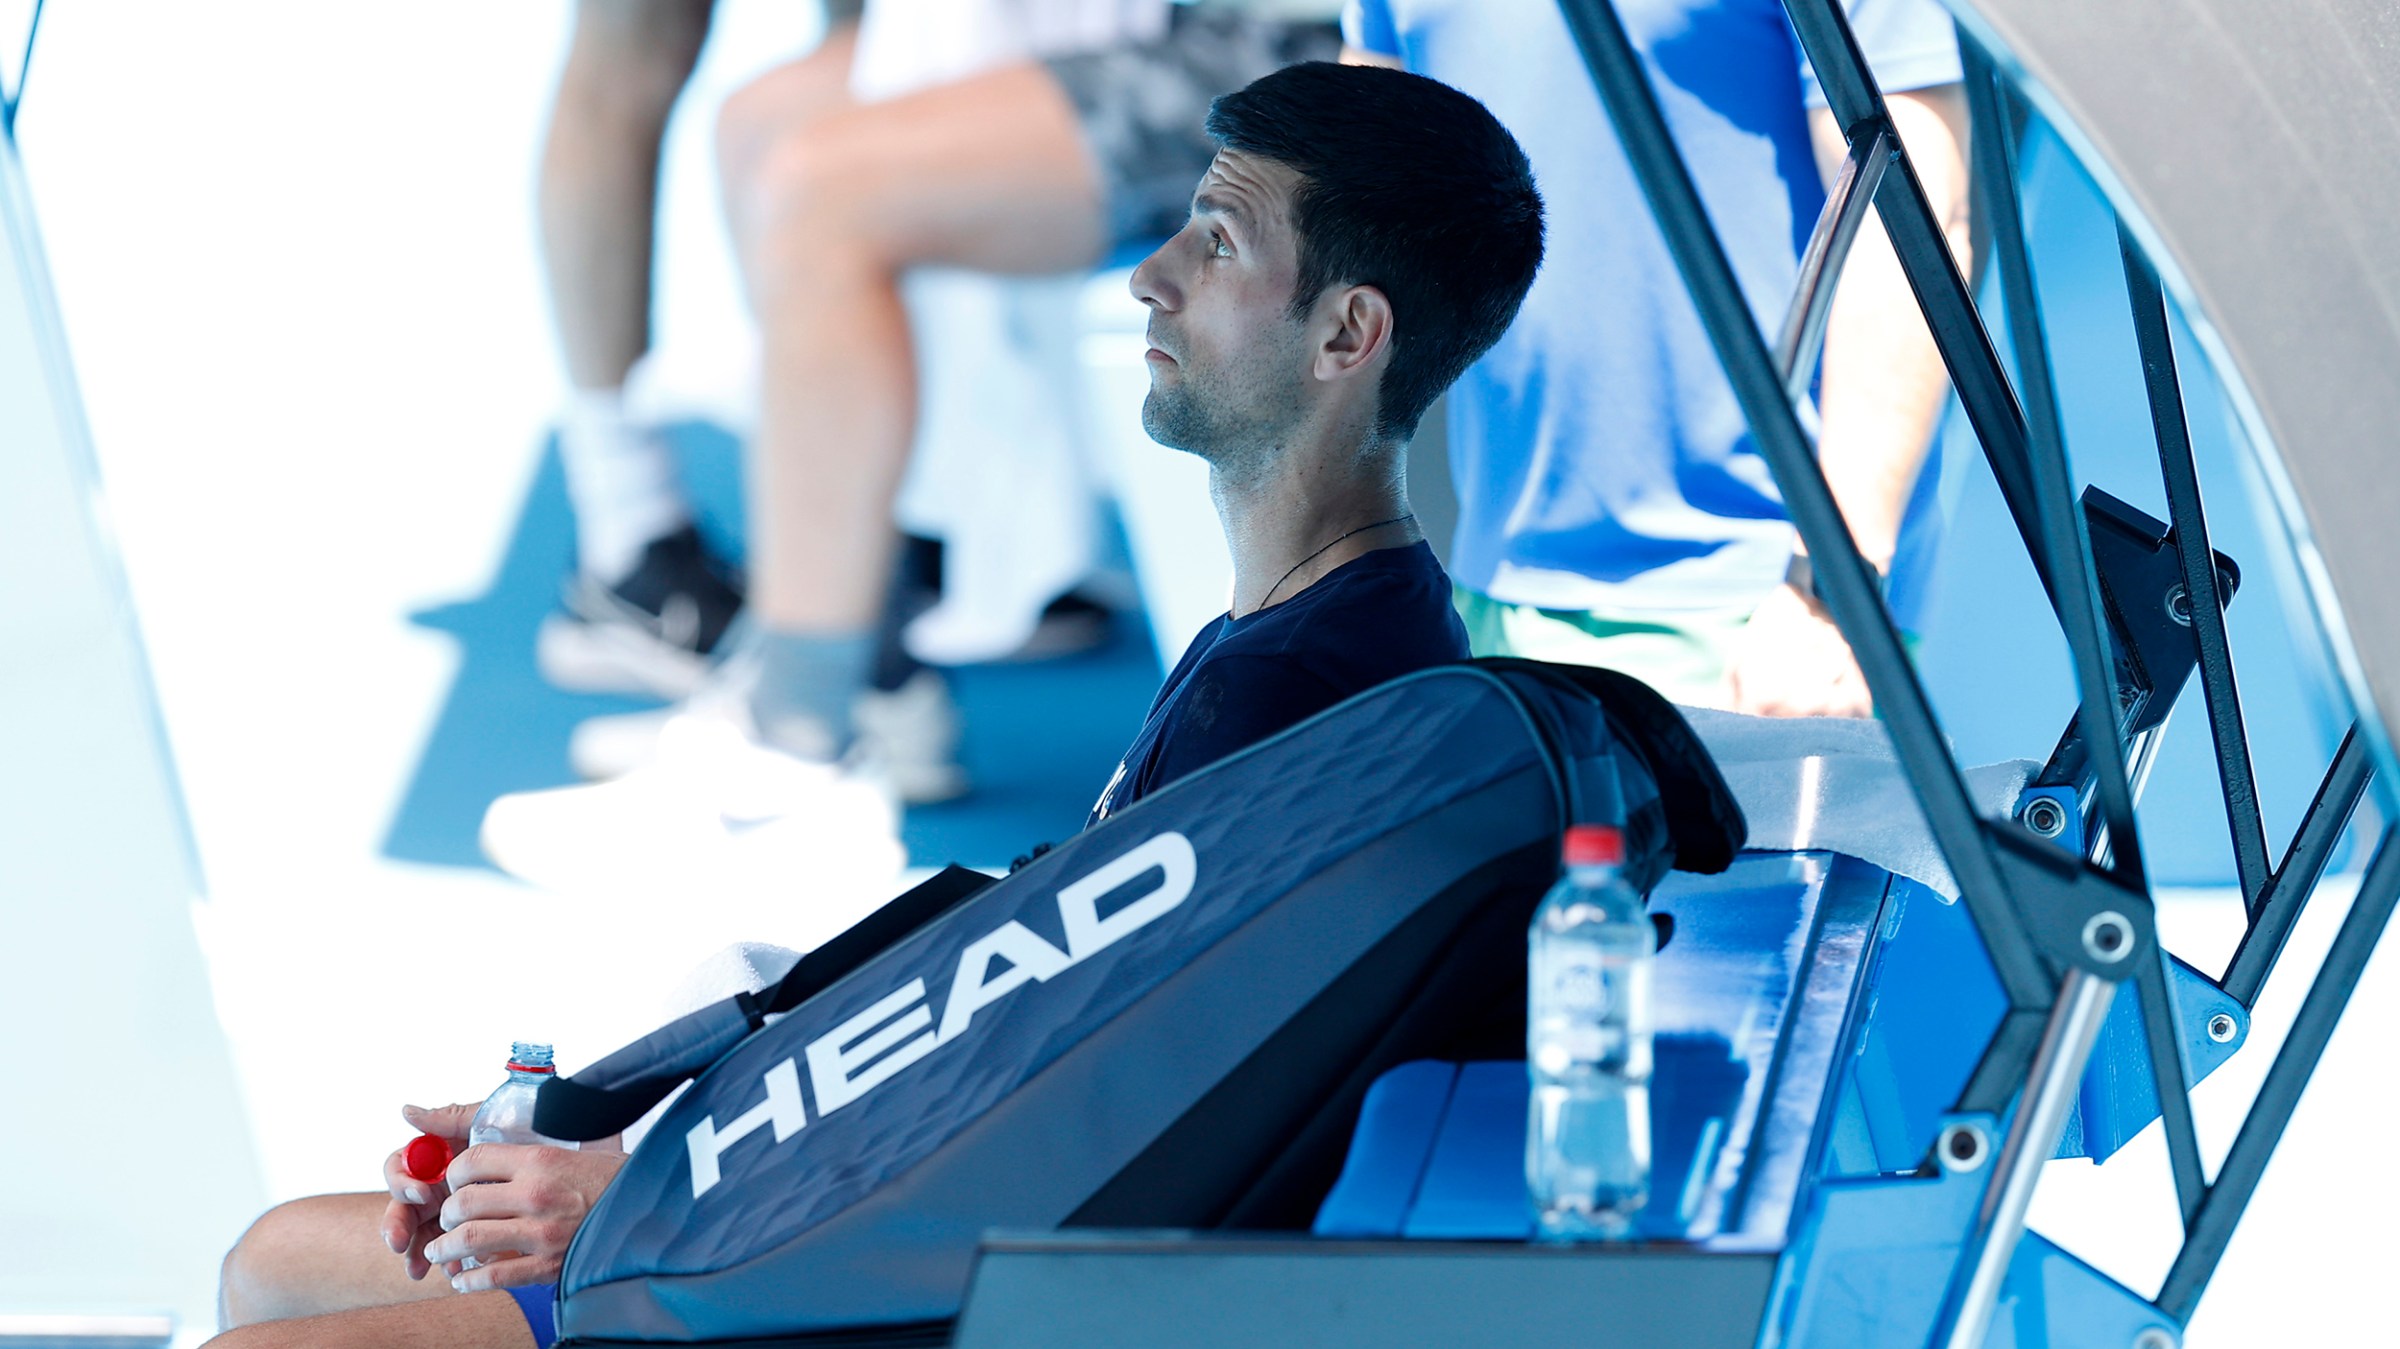 Novak Djokovic of Serbia is seen during a practice session ahead of the 2022 Australian Open at Melbourne Park on January 12, 2022 in Melbourne, Australia.